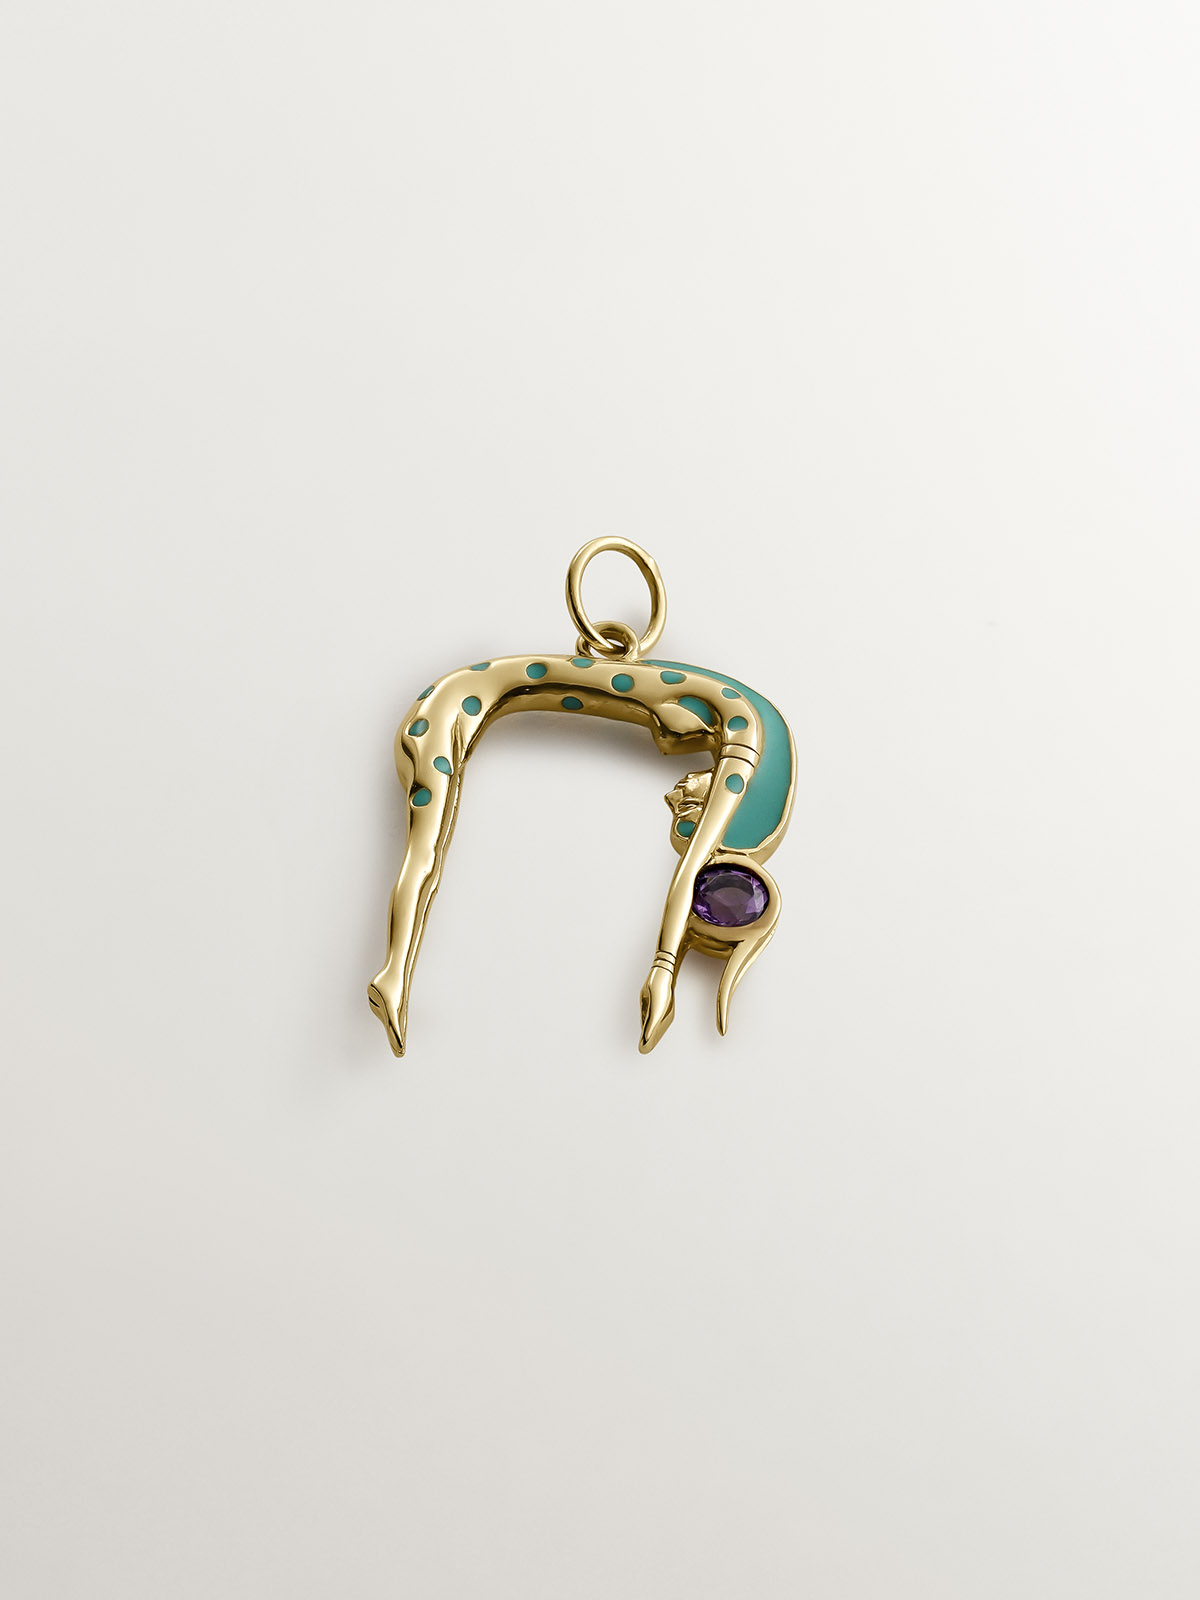 925 Silver charm bathed in 18K yellow gold in the shape of the Nut goddess, purple amethyst and enamel.